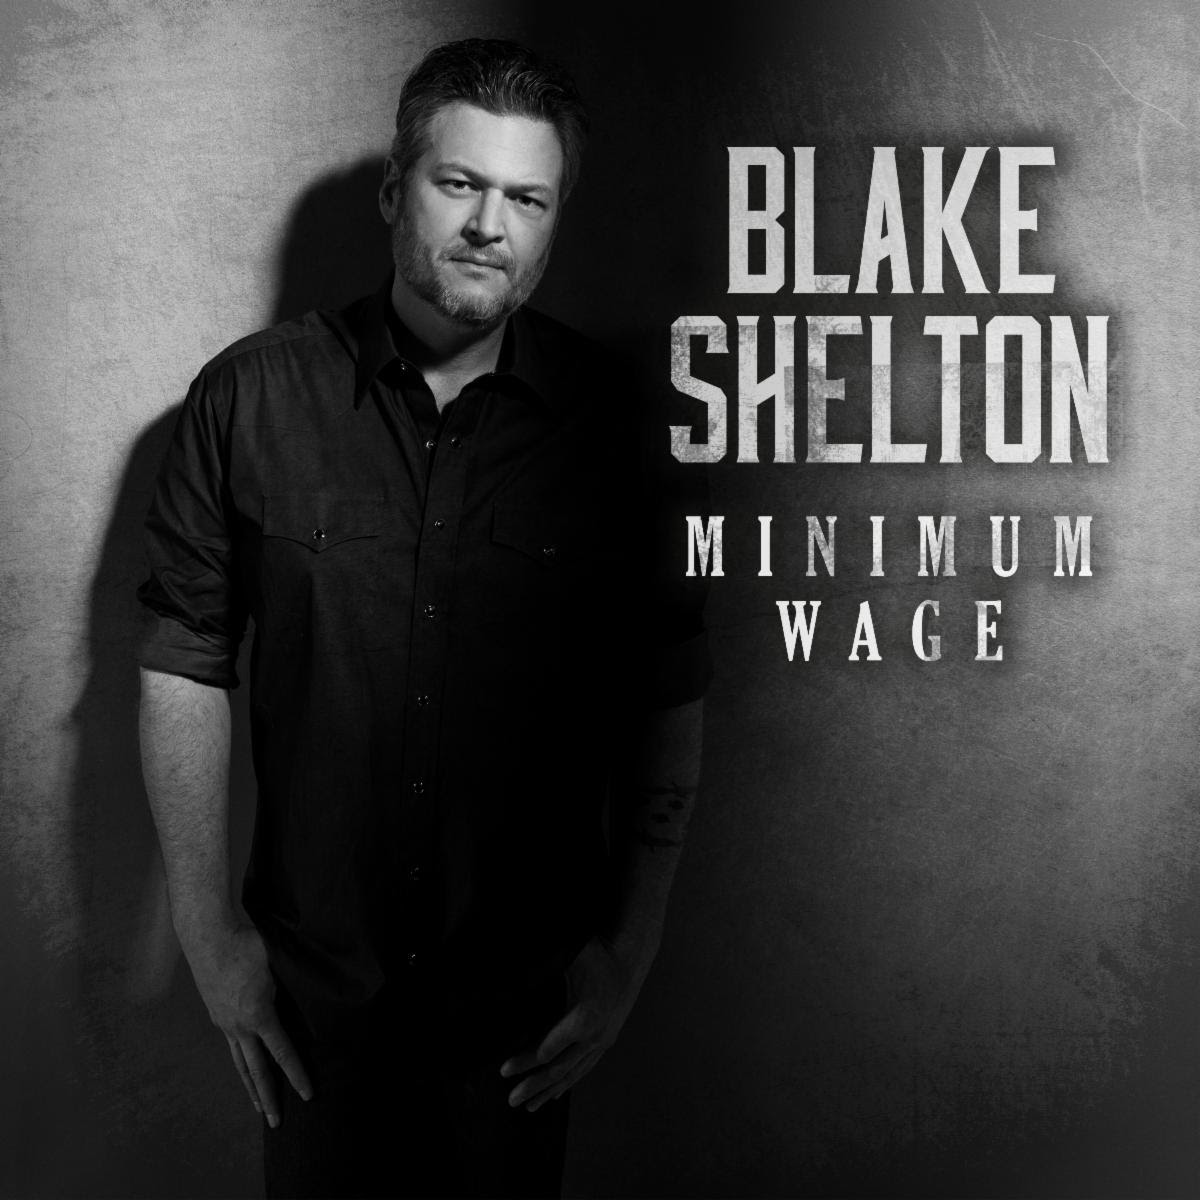 Blake Shelton's new song "Minimum Wage" is available everywhere now